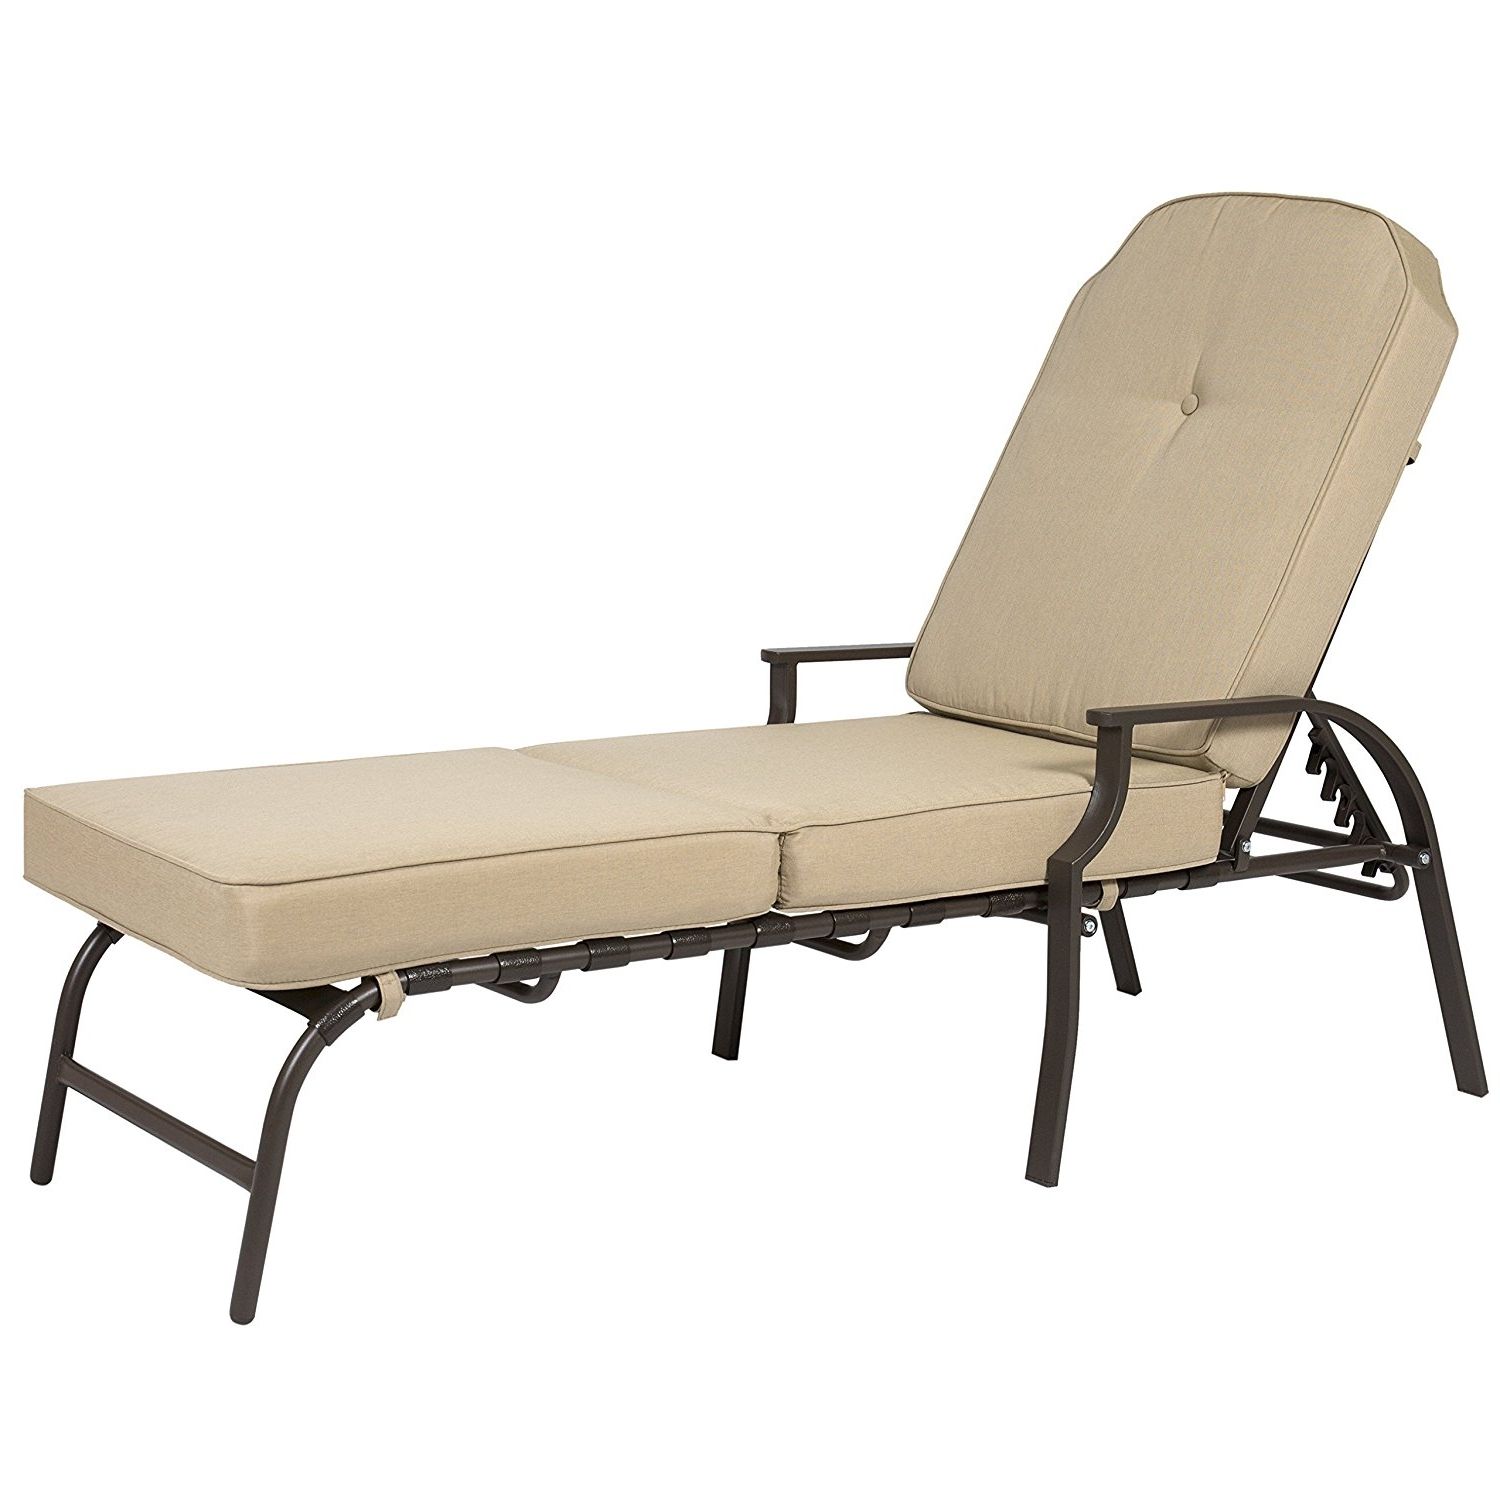 Most Recent Chaise Lounge Computer Chairs Throughout Amazon : Best Choice Products Outdoor Chaise Lounge Chair W (View 11 of 15)